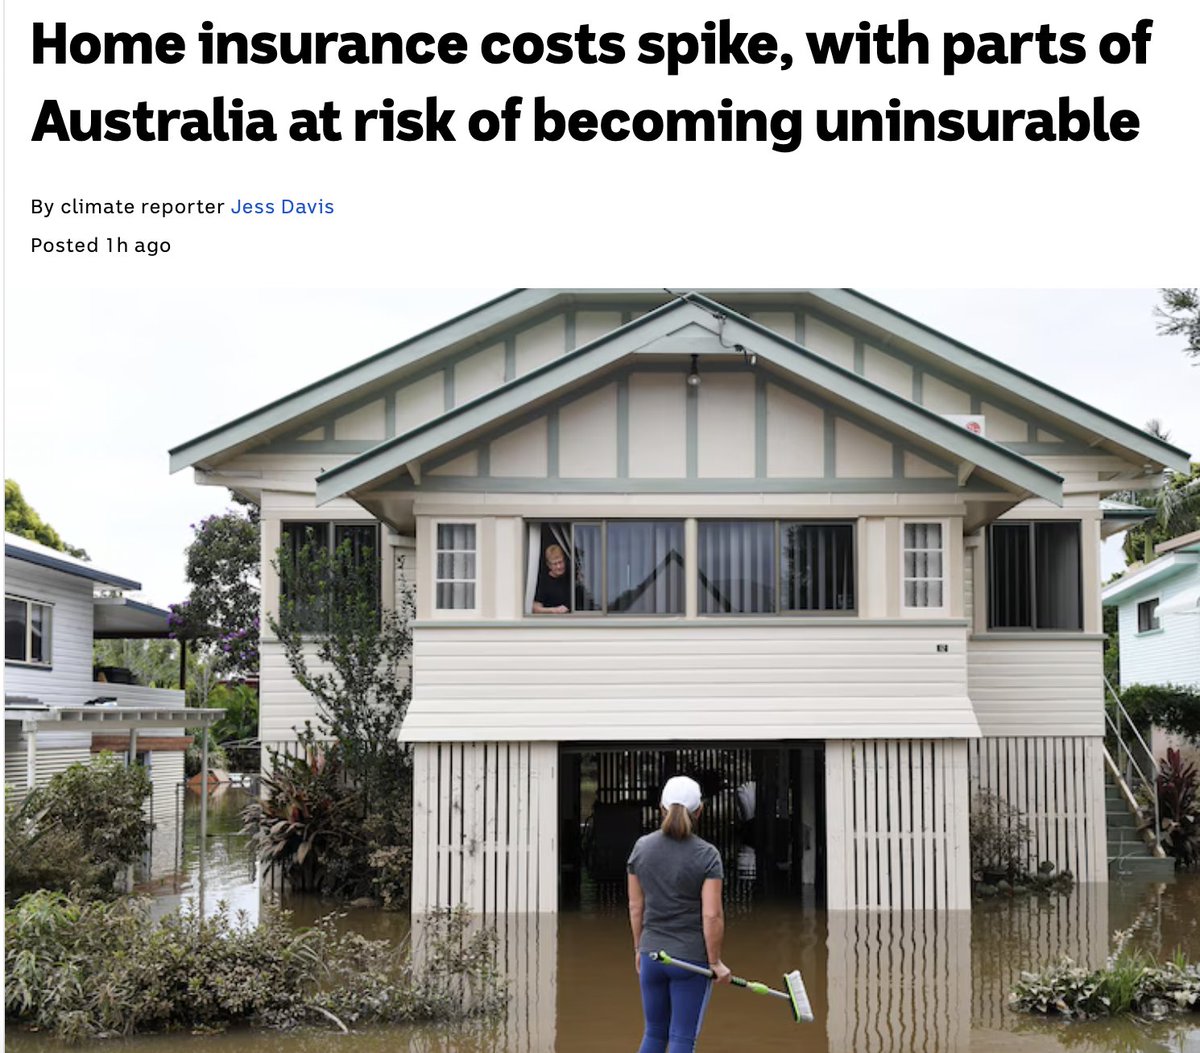 Insurance premiums are skyrocketing. It doesn't just affect those in climate change fuelled disaster-prone areas. Ultimately, everyone ends up footing the bill, including higher taxes for clean ups. A 'carbon pollution tax' or the like is nothing compared to the alternatives.